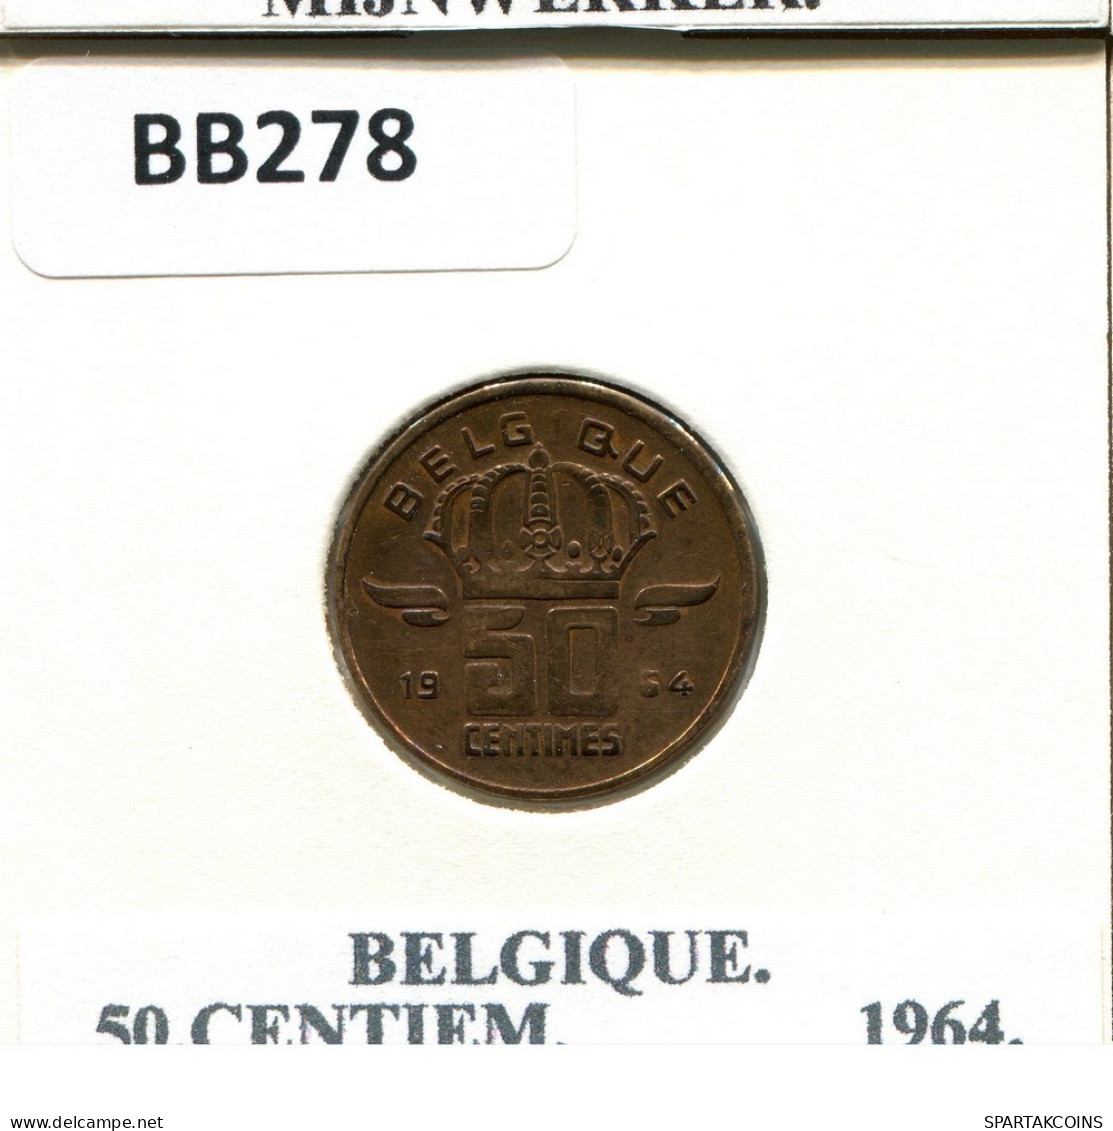 50 CENTIMES 1964 FRENCH Text BELGIUM Coin #BB278.U.A - 50 Centimes